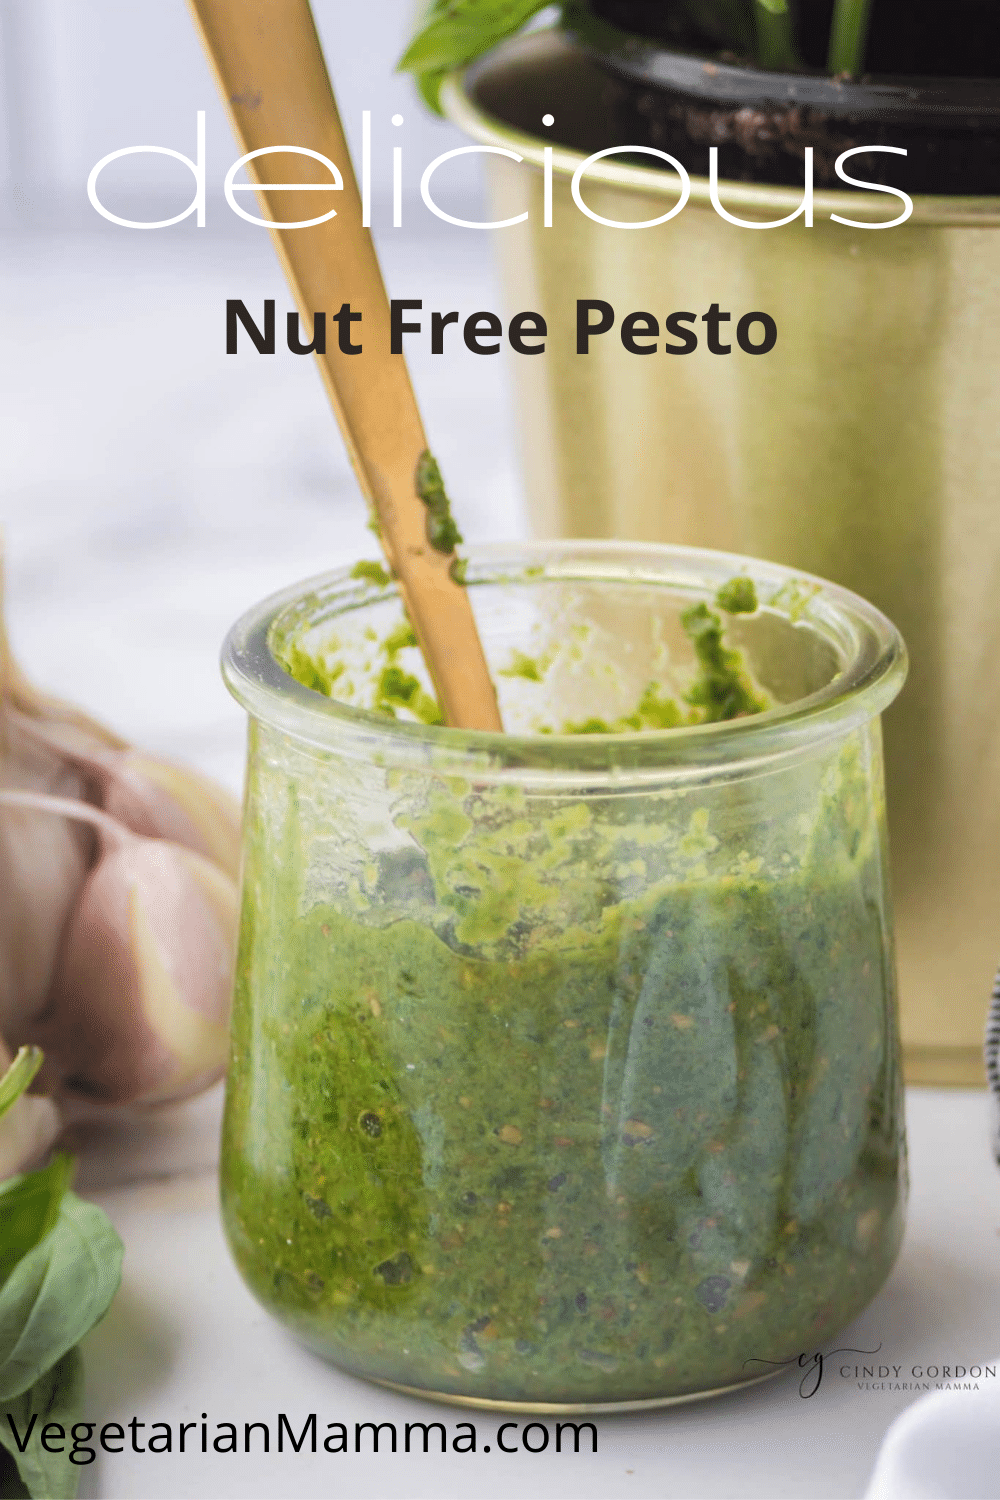 A delicious sauce made with fresh basil and garlic, typically pesto involves nuts, but not this one! Nut Free pesto is made with sunflower seeds to make it allergy friendly, but still delicious. #pesto #allergyfriendly